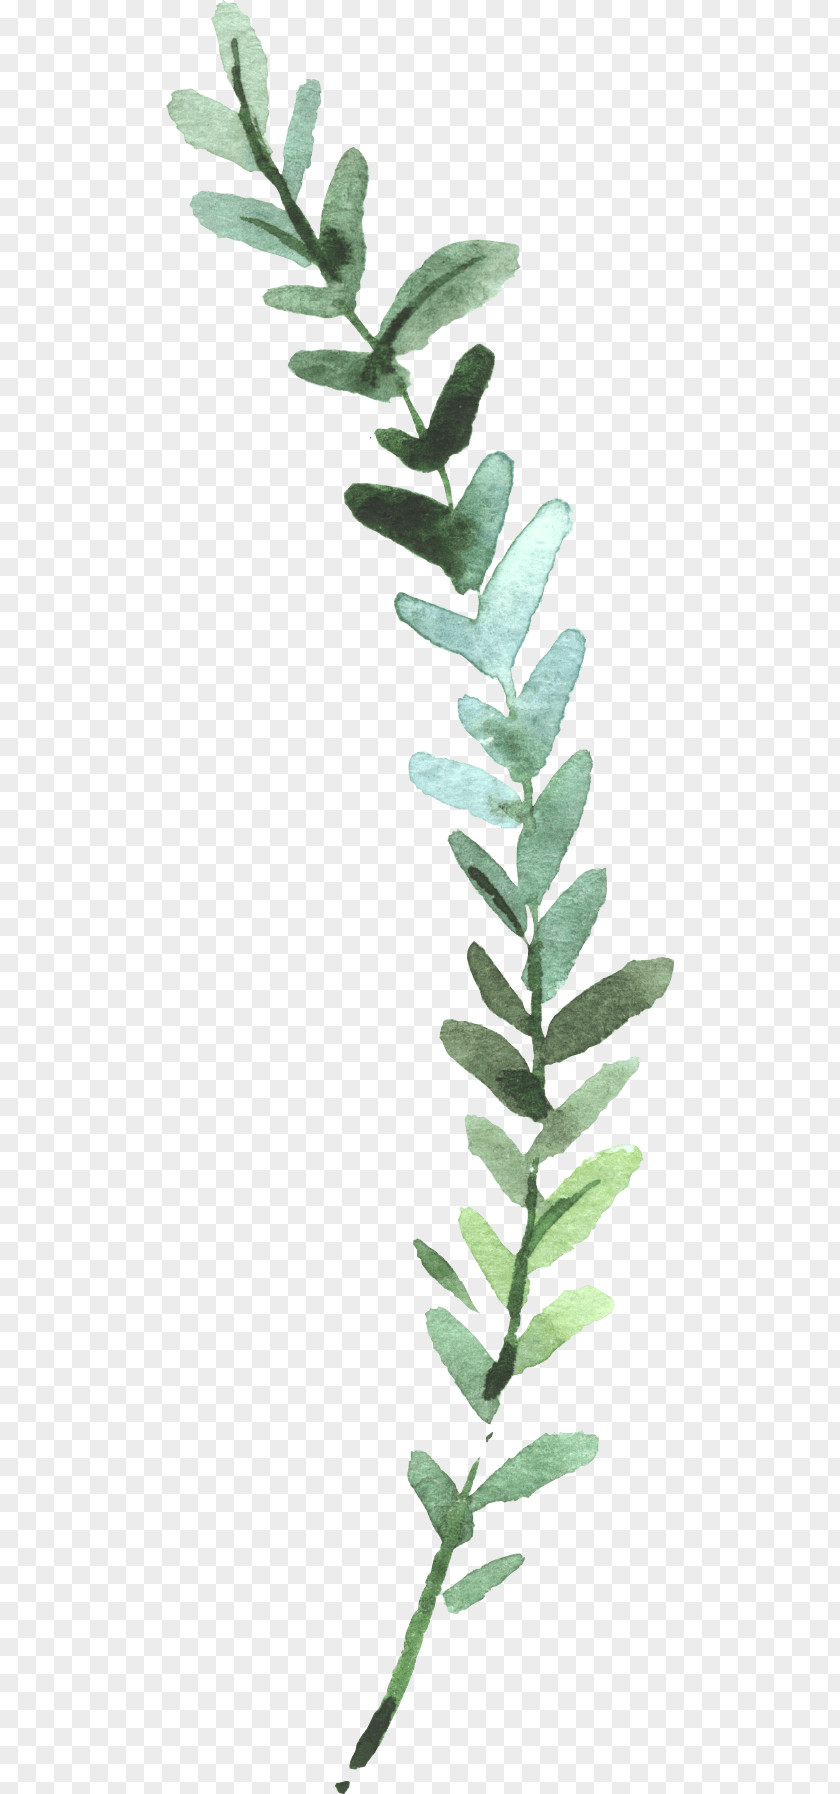 Watercolor Painting Leaf Image Plants PNG